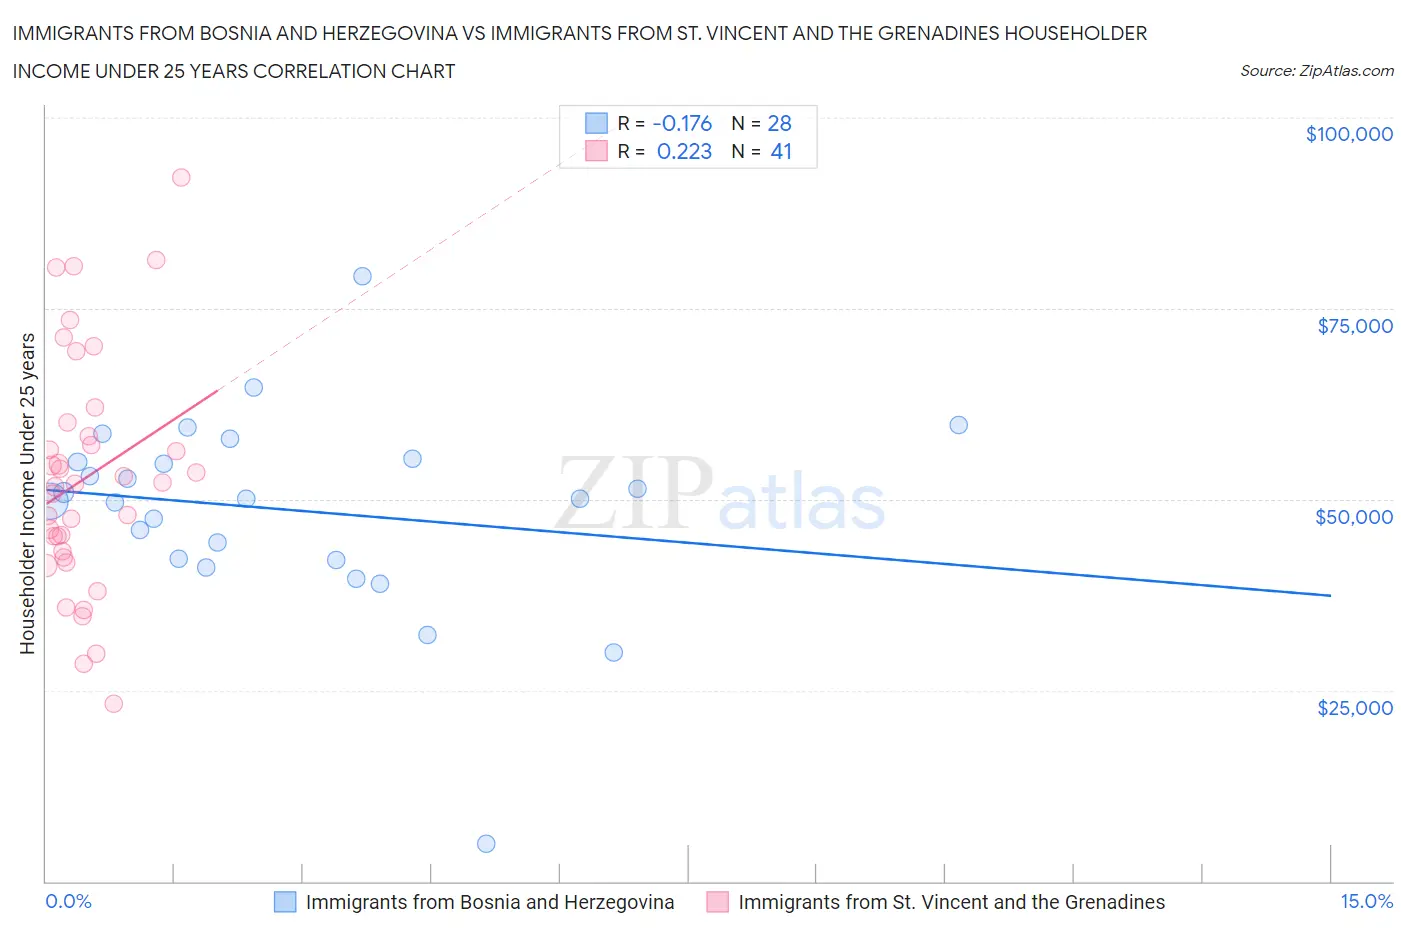 Immigrants from Bosnia and Herzegovina vs Immigrants from St. Vincent and the Grenadines Householder Income Under 25 years